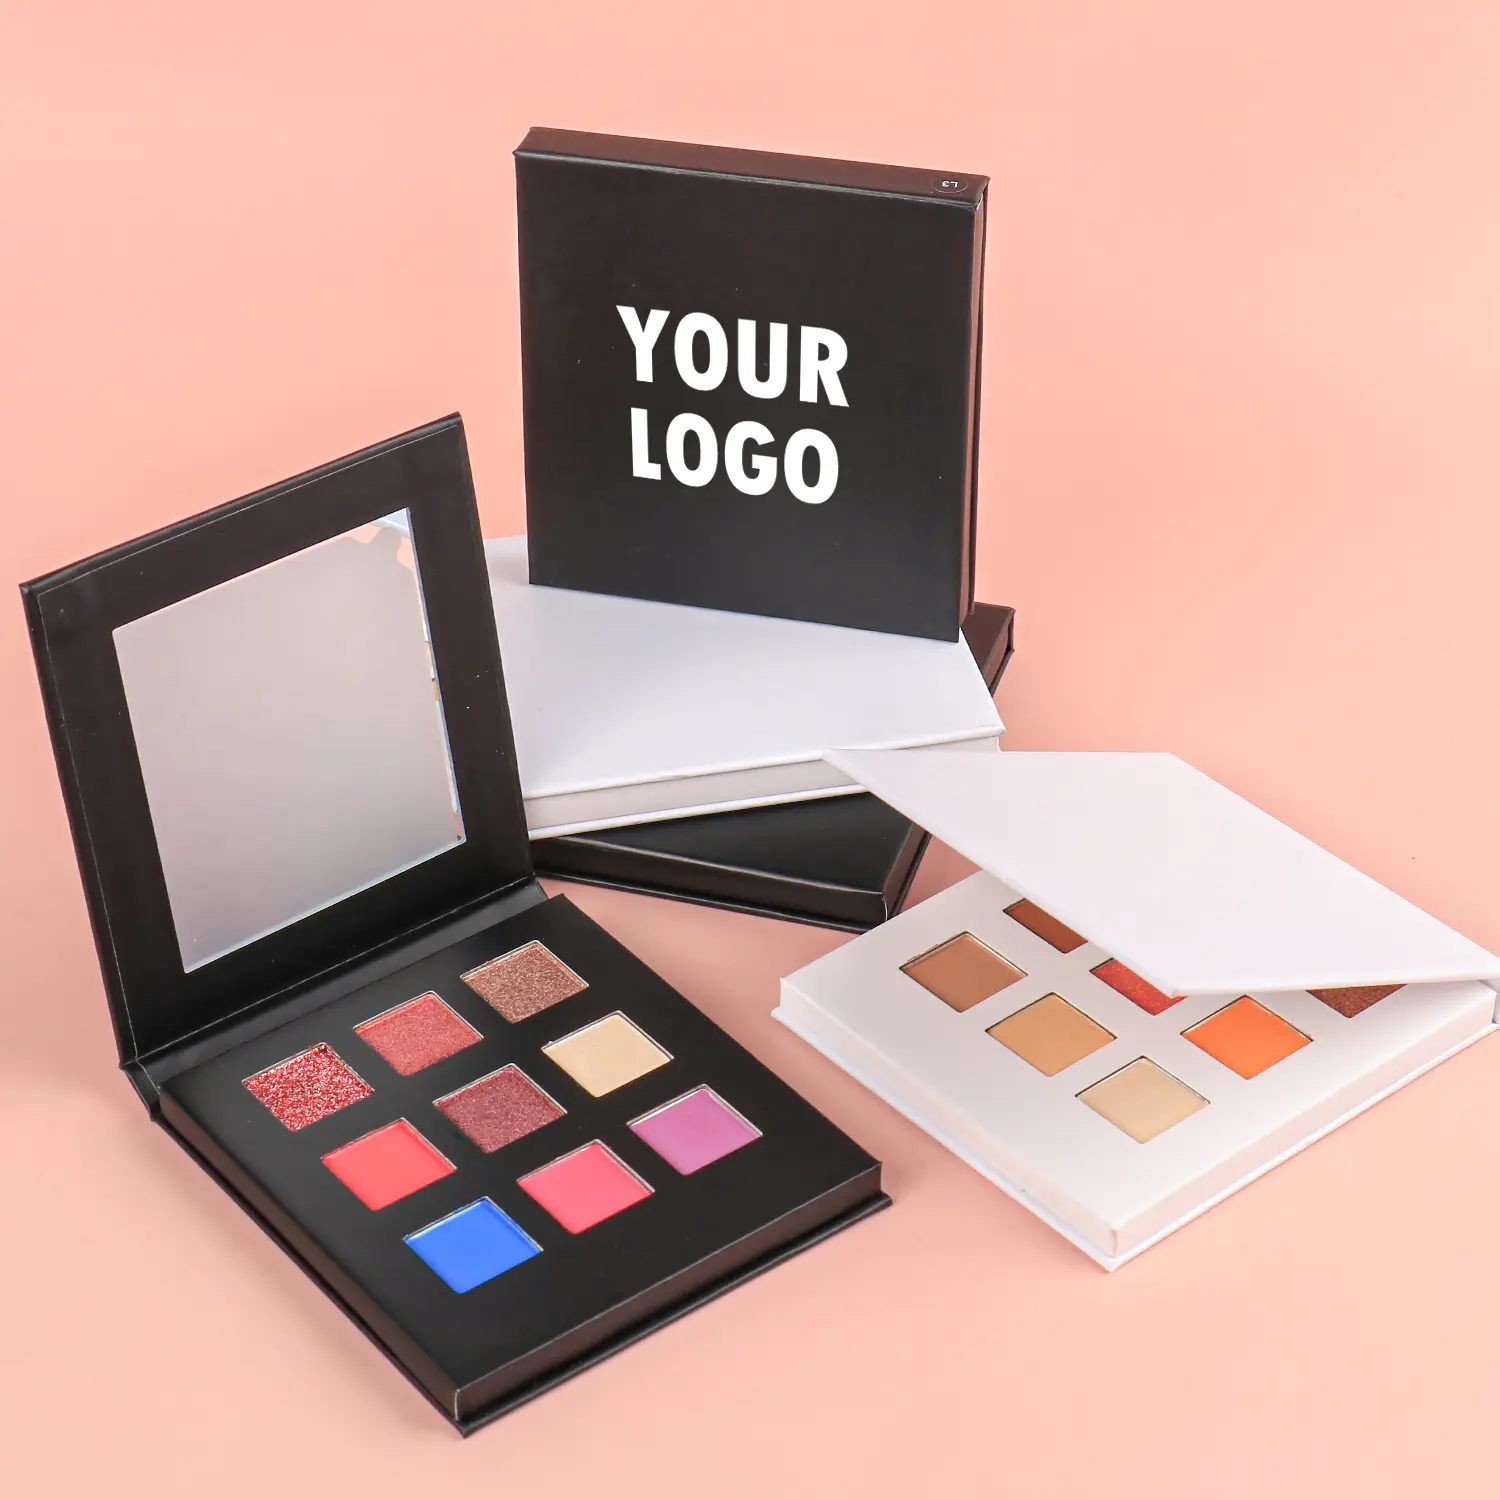 Customized logo is not easy to halo dye neutral holding makeup eyeshadow tray do not take off makeup matte 9 color eyeshadow